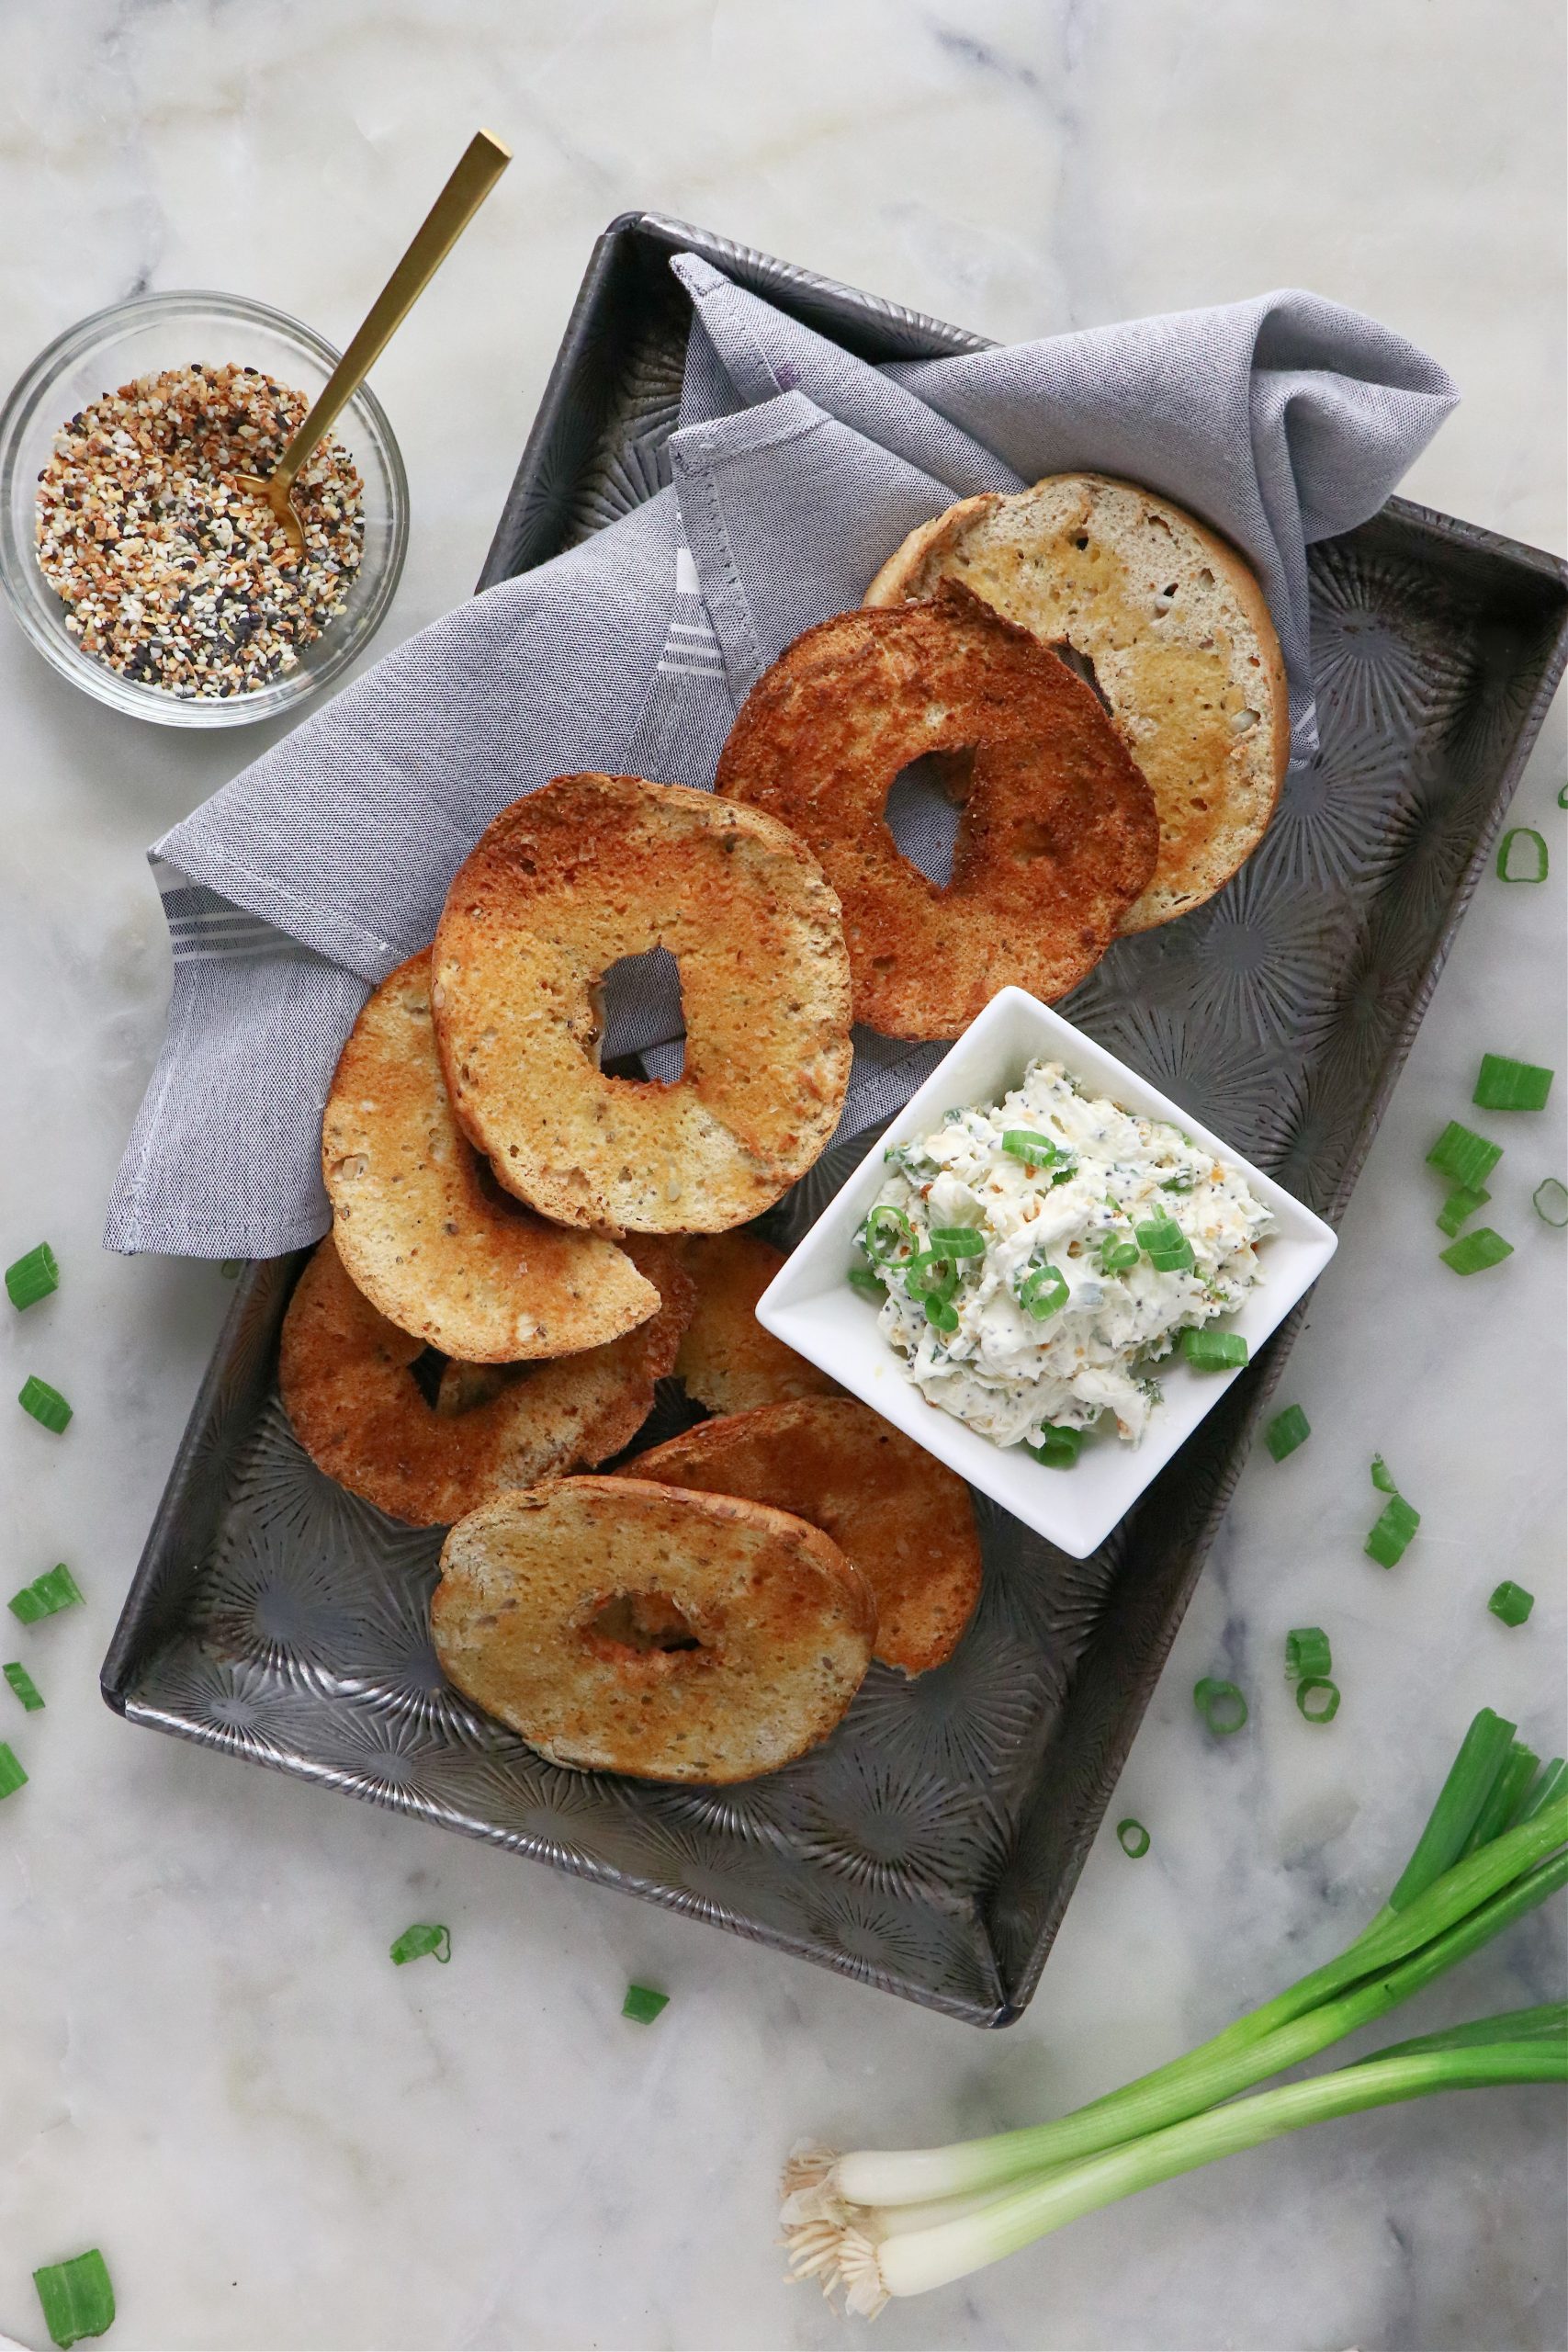 Air Fryer Everything Bagel Chips with Scallion Cream Cheese - Labeless  Nutrition